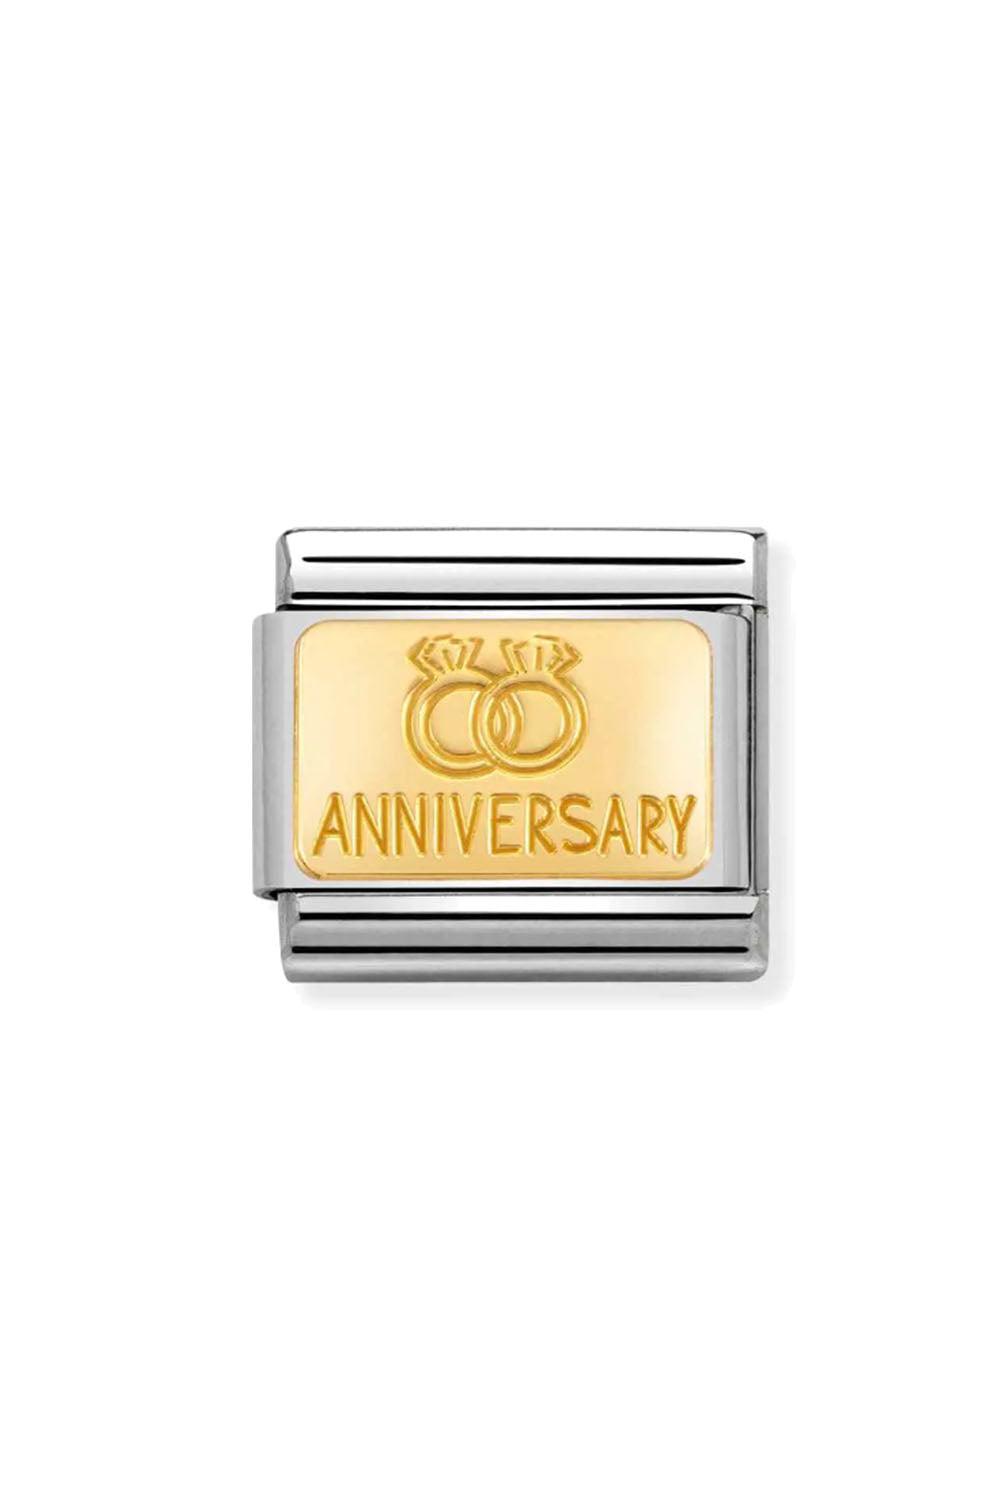 Engraved signs 18k Gold Anniversary with wedding rings